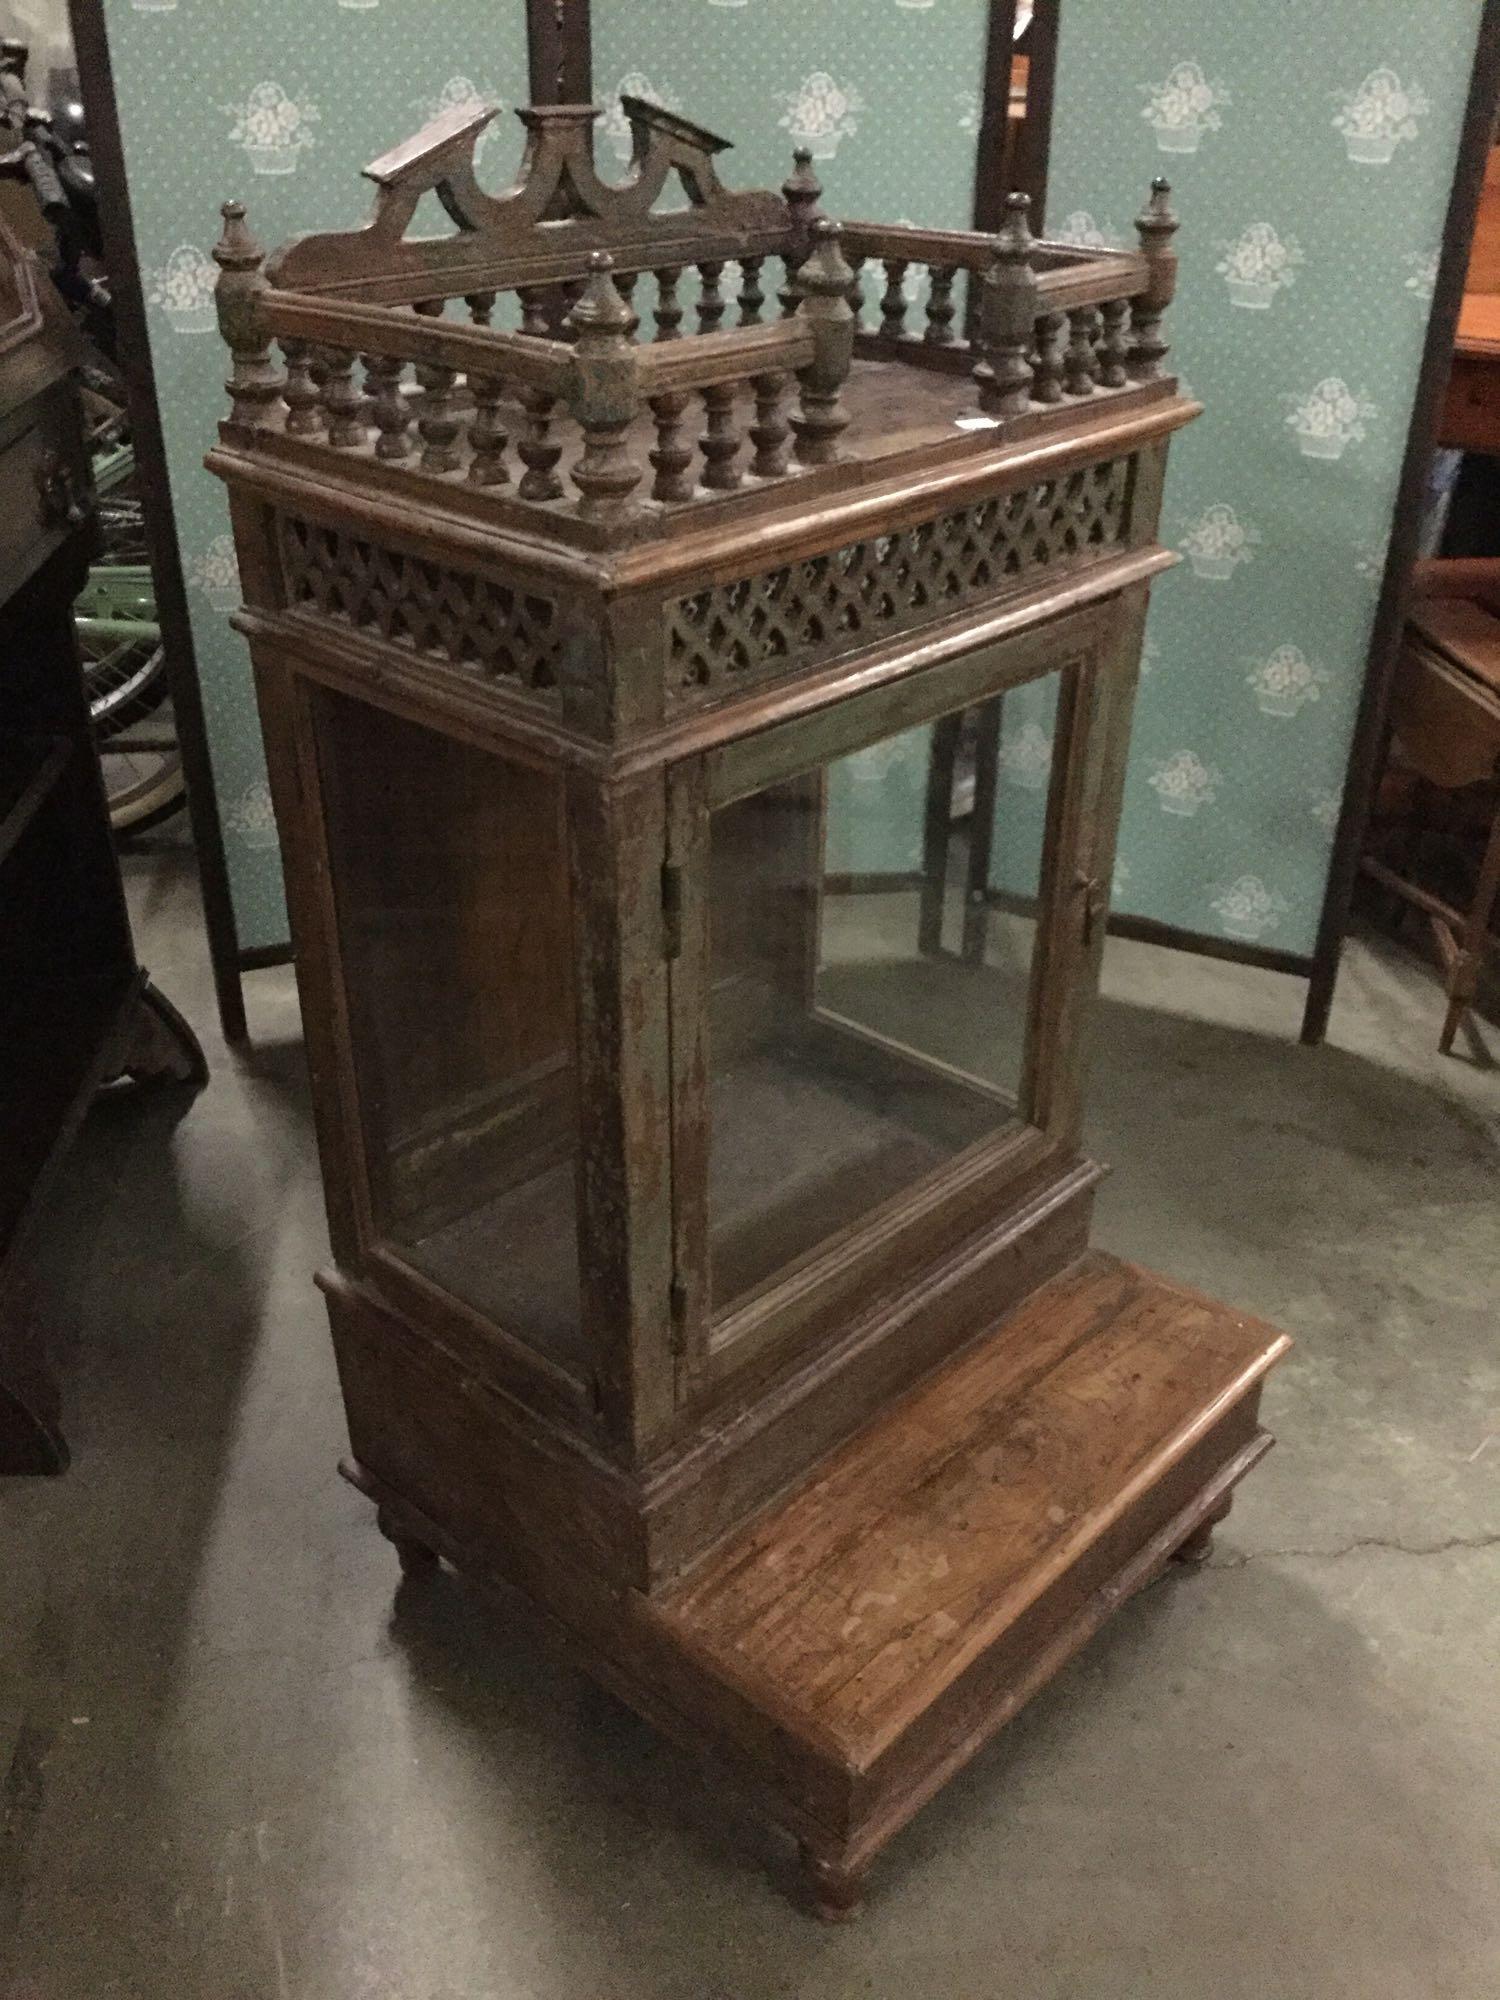 Antique 1860 teak wood carved counter top display case with glass window doors